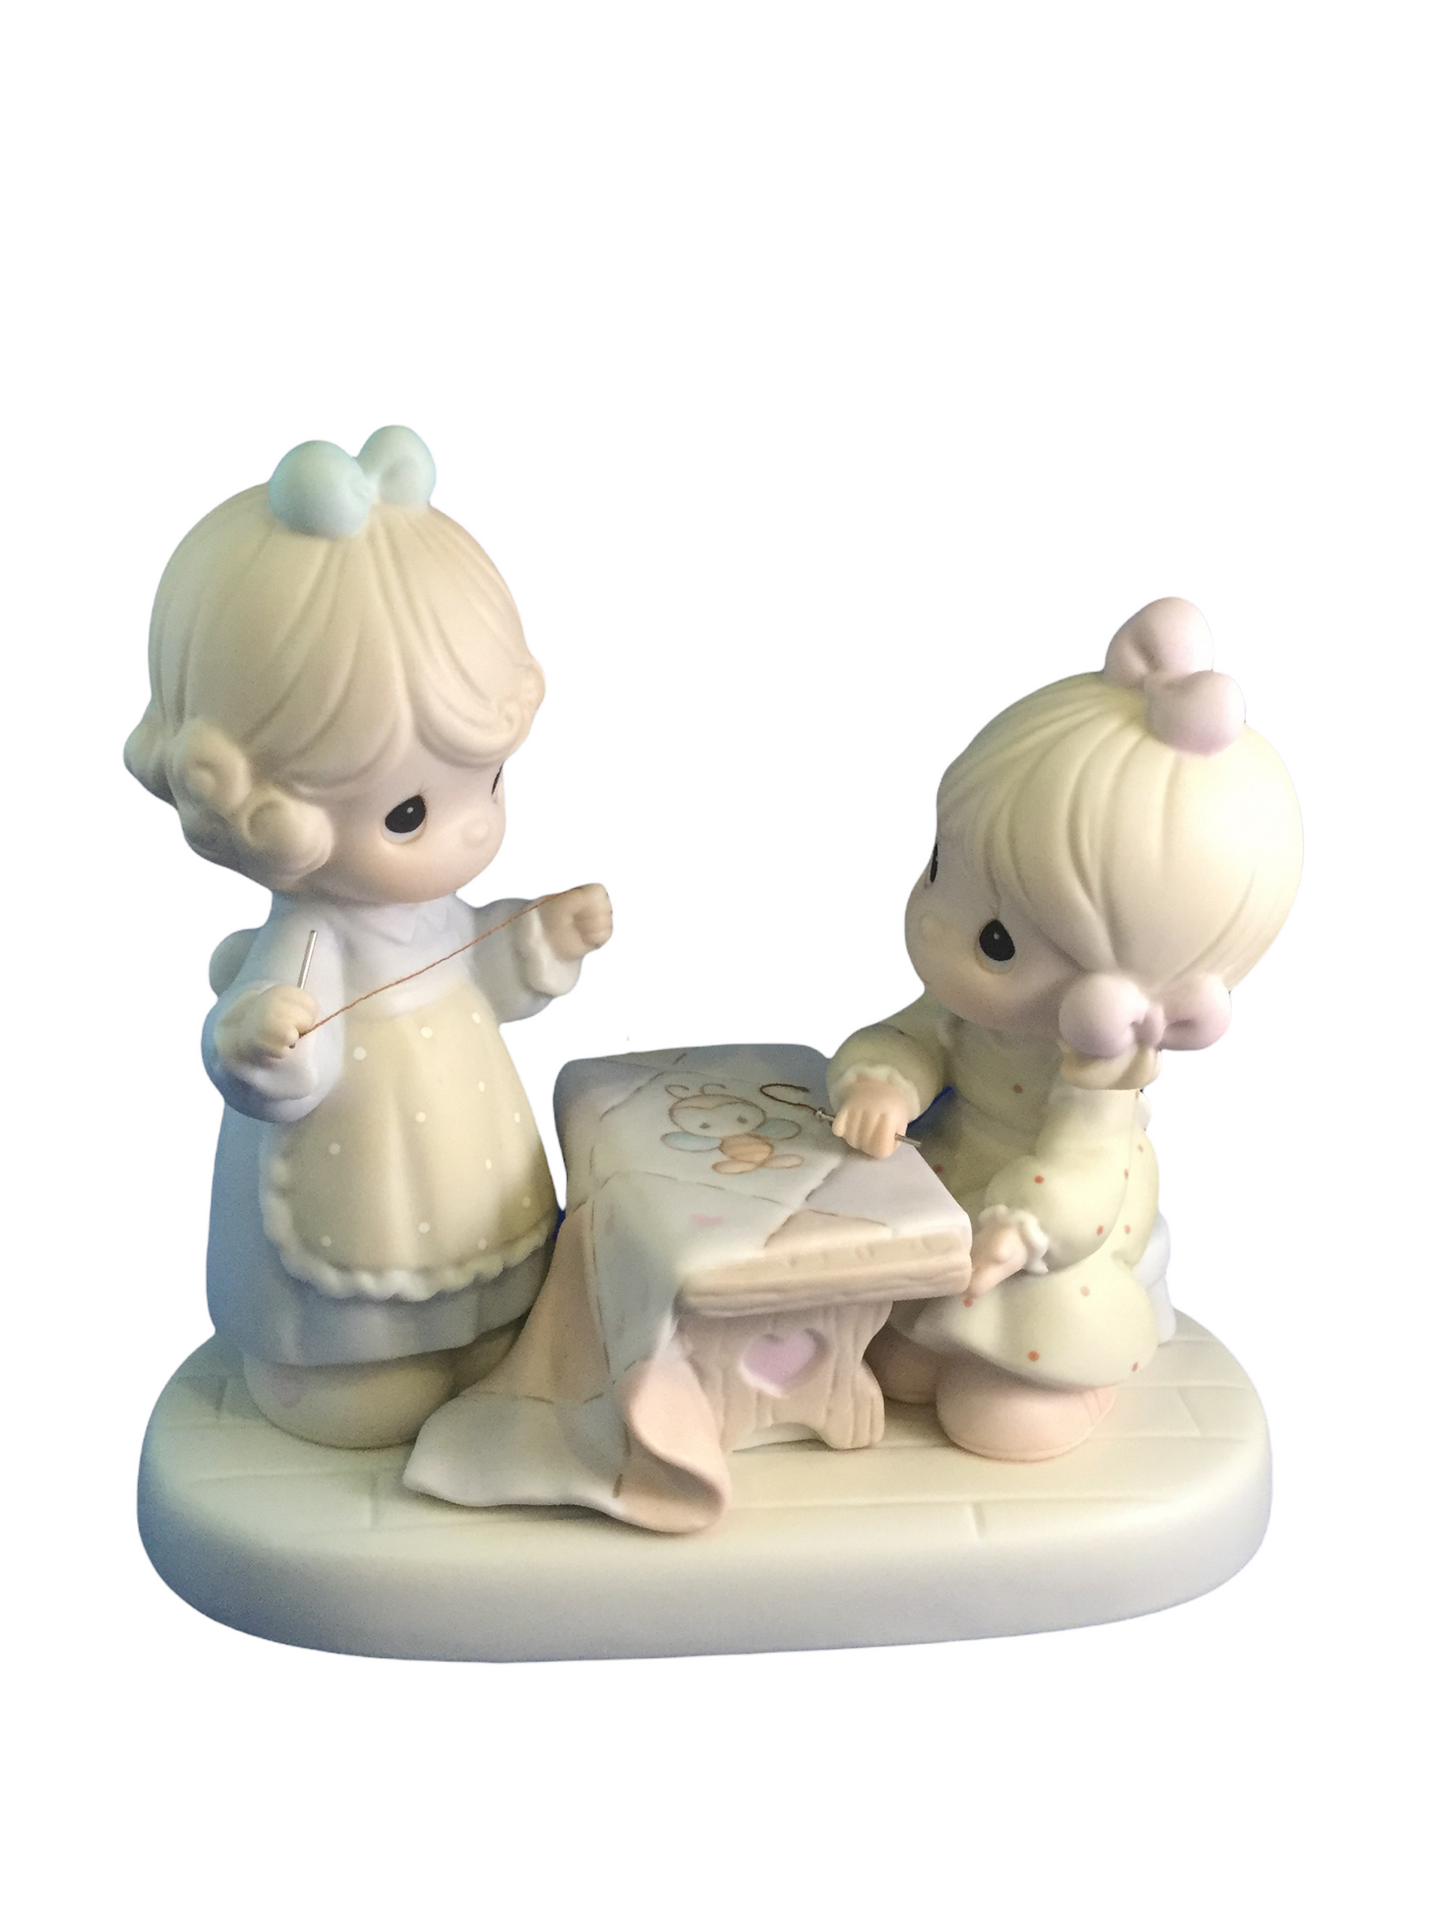 Friends Are Forever Sew Bee It - Precious Moment Figurine